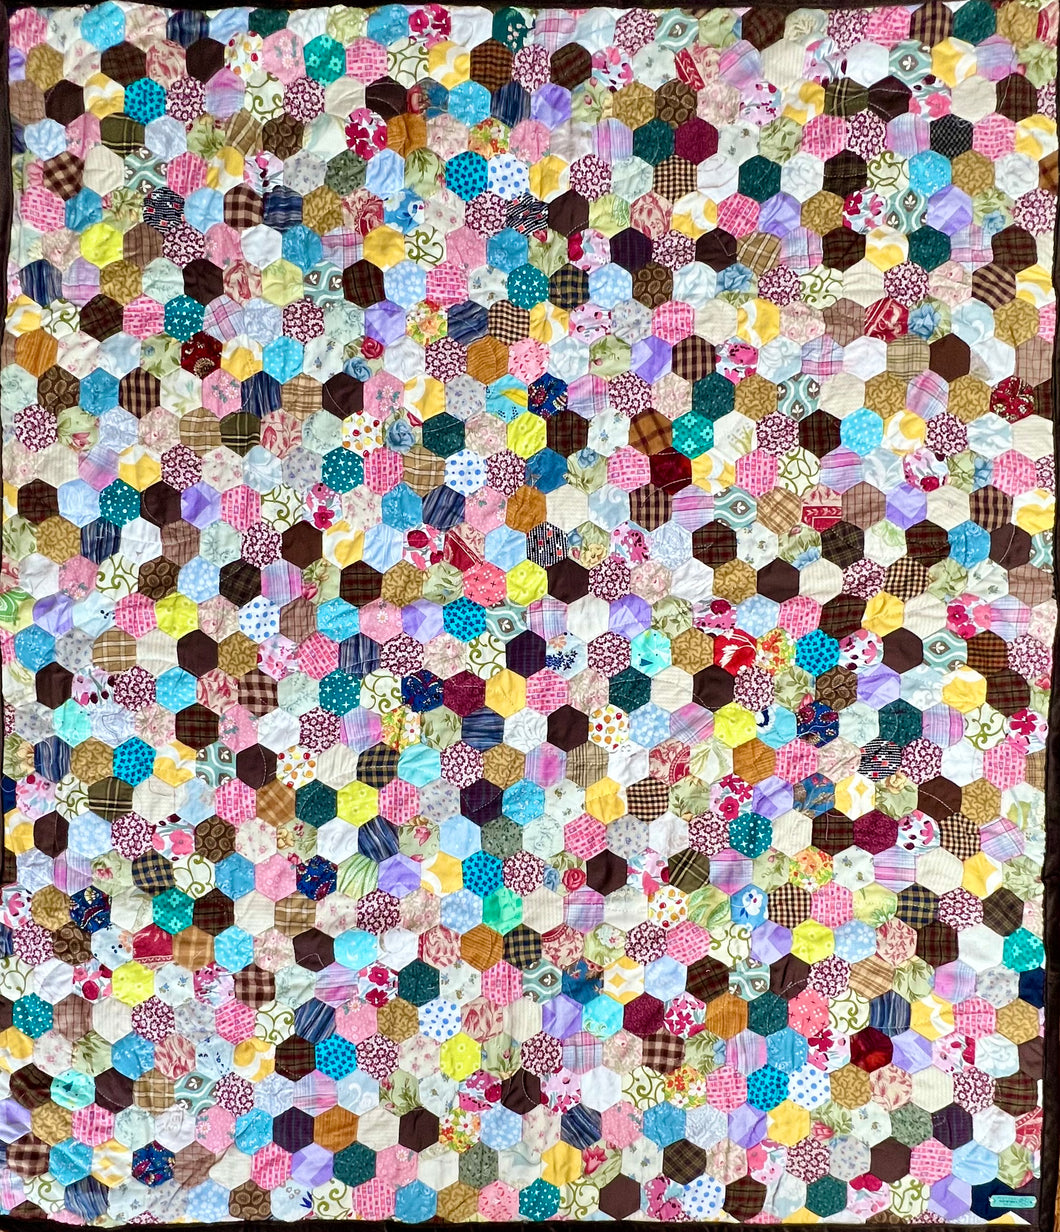 Playa Escondida, A Finished Quilt